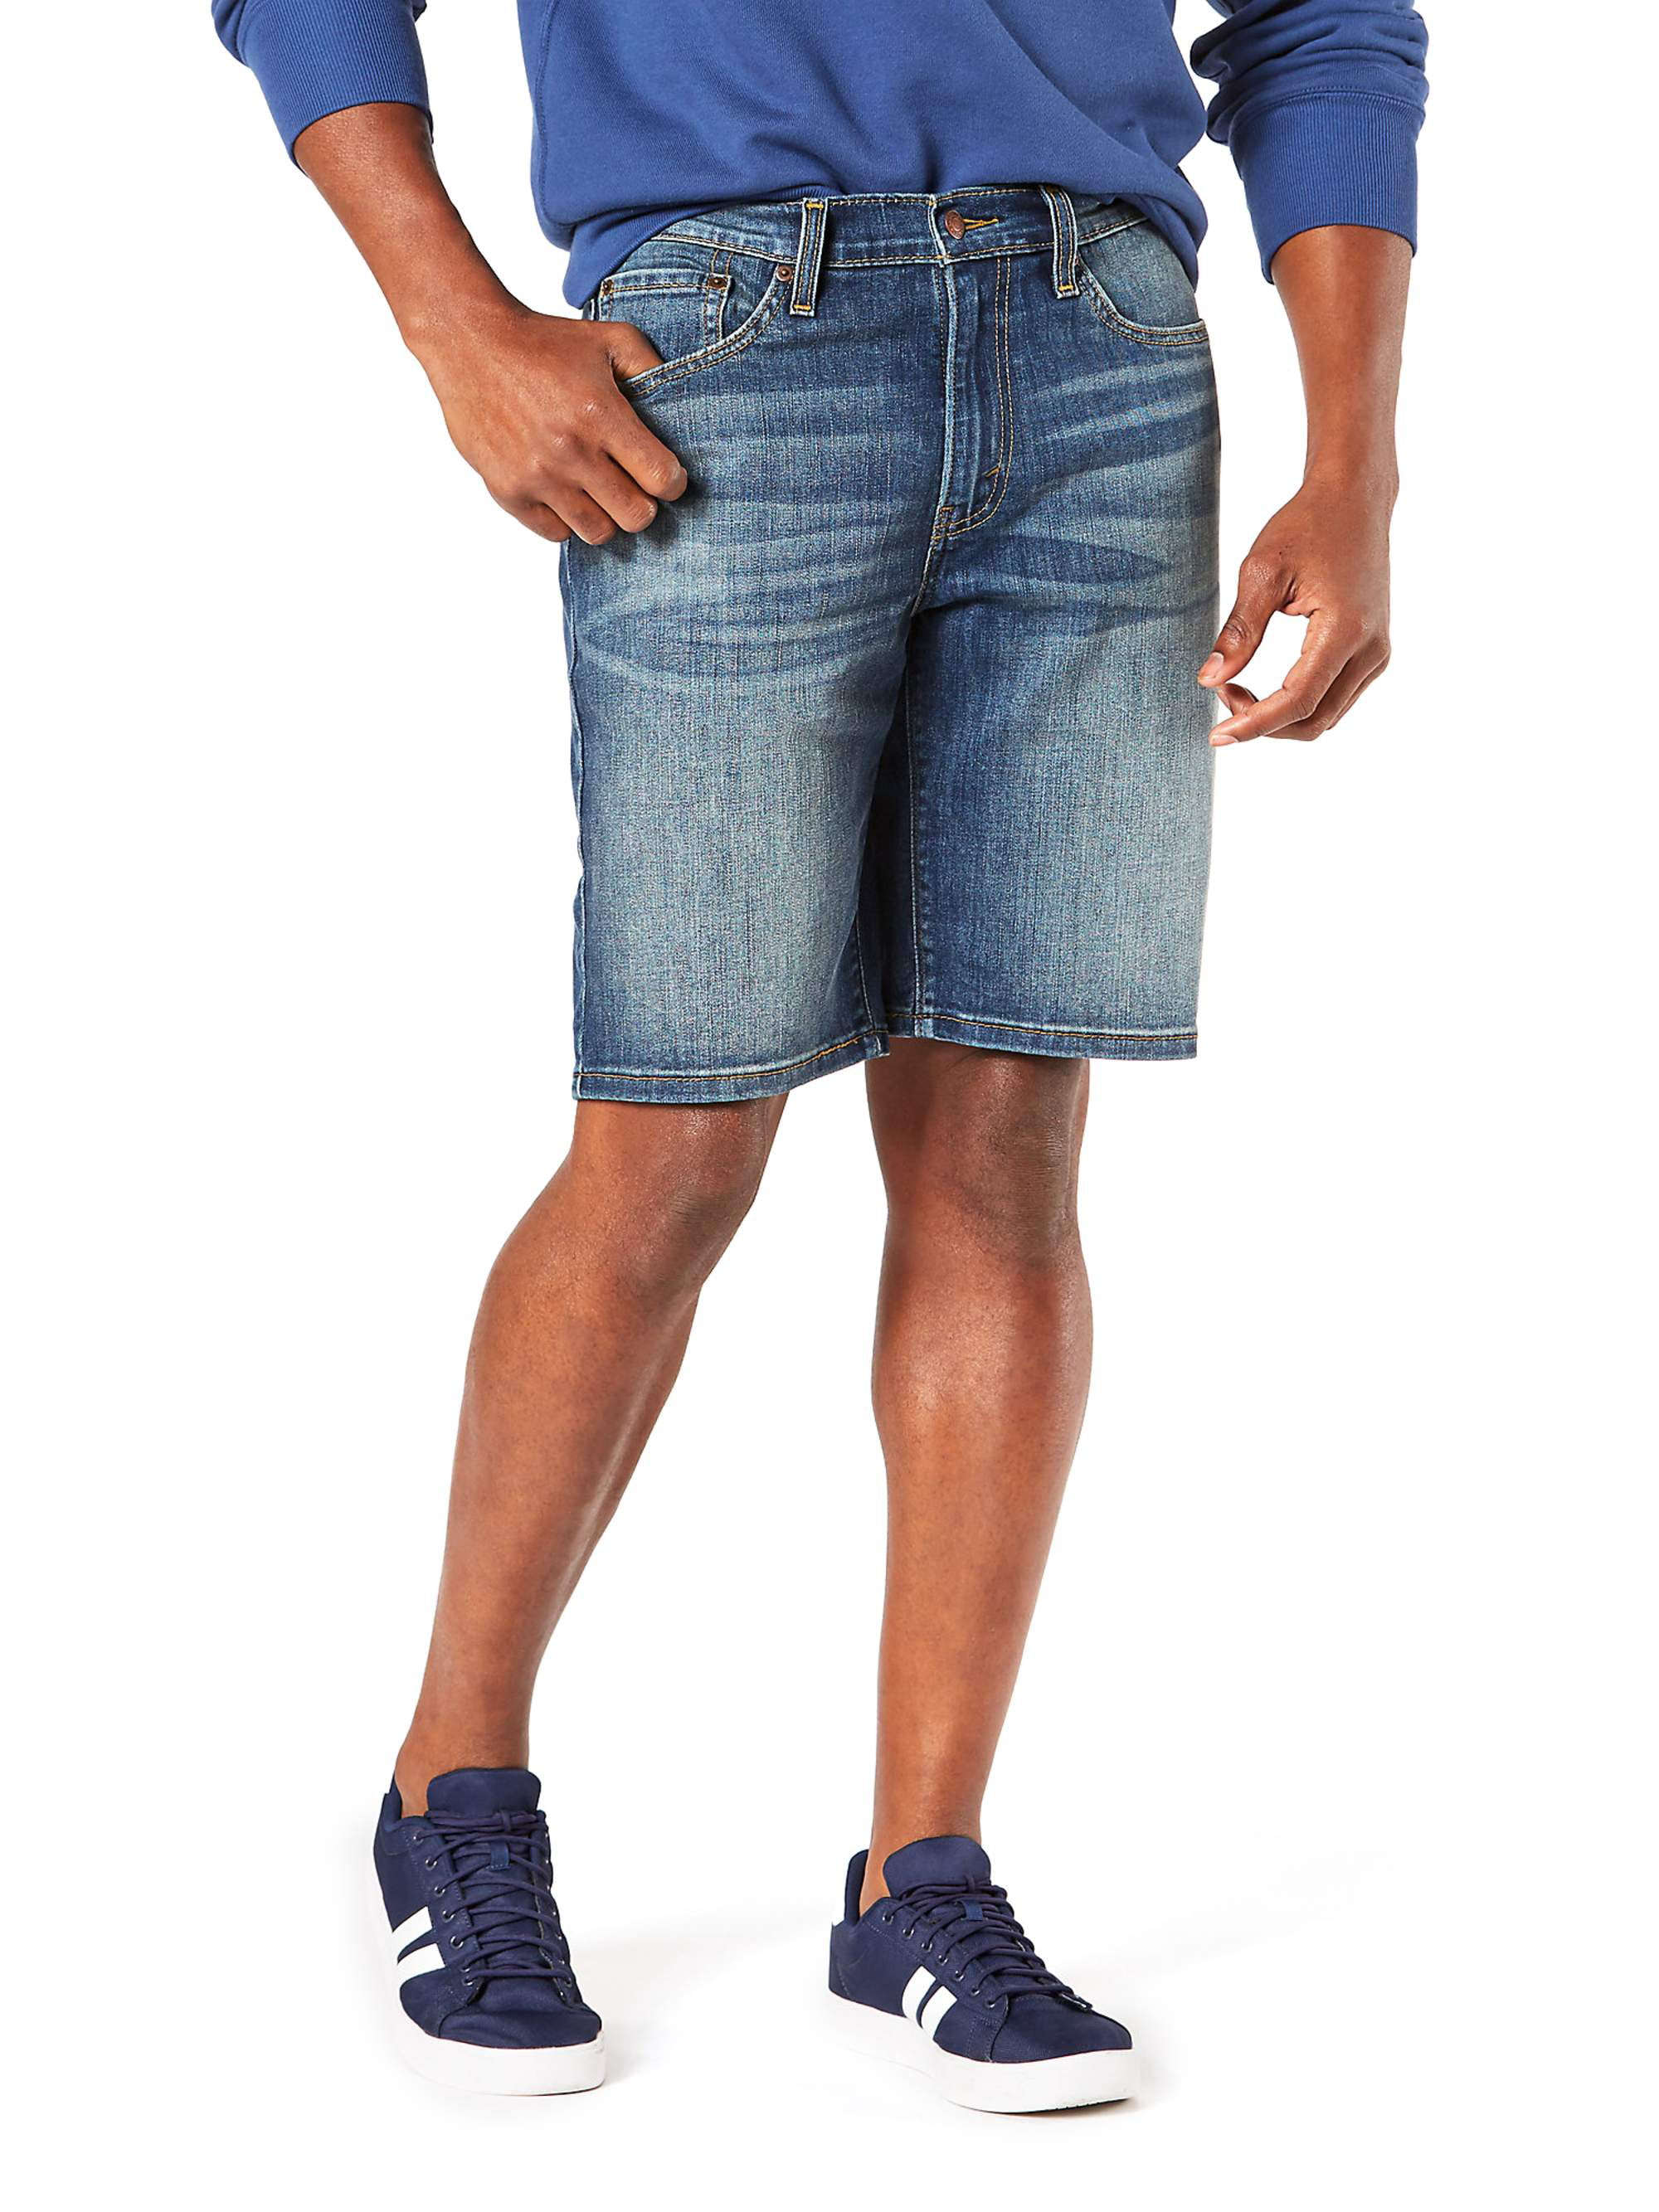 Signature by Levi Strauss & Co. Men's Athletic Fit Jean Shorts 